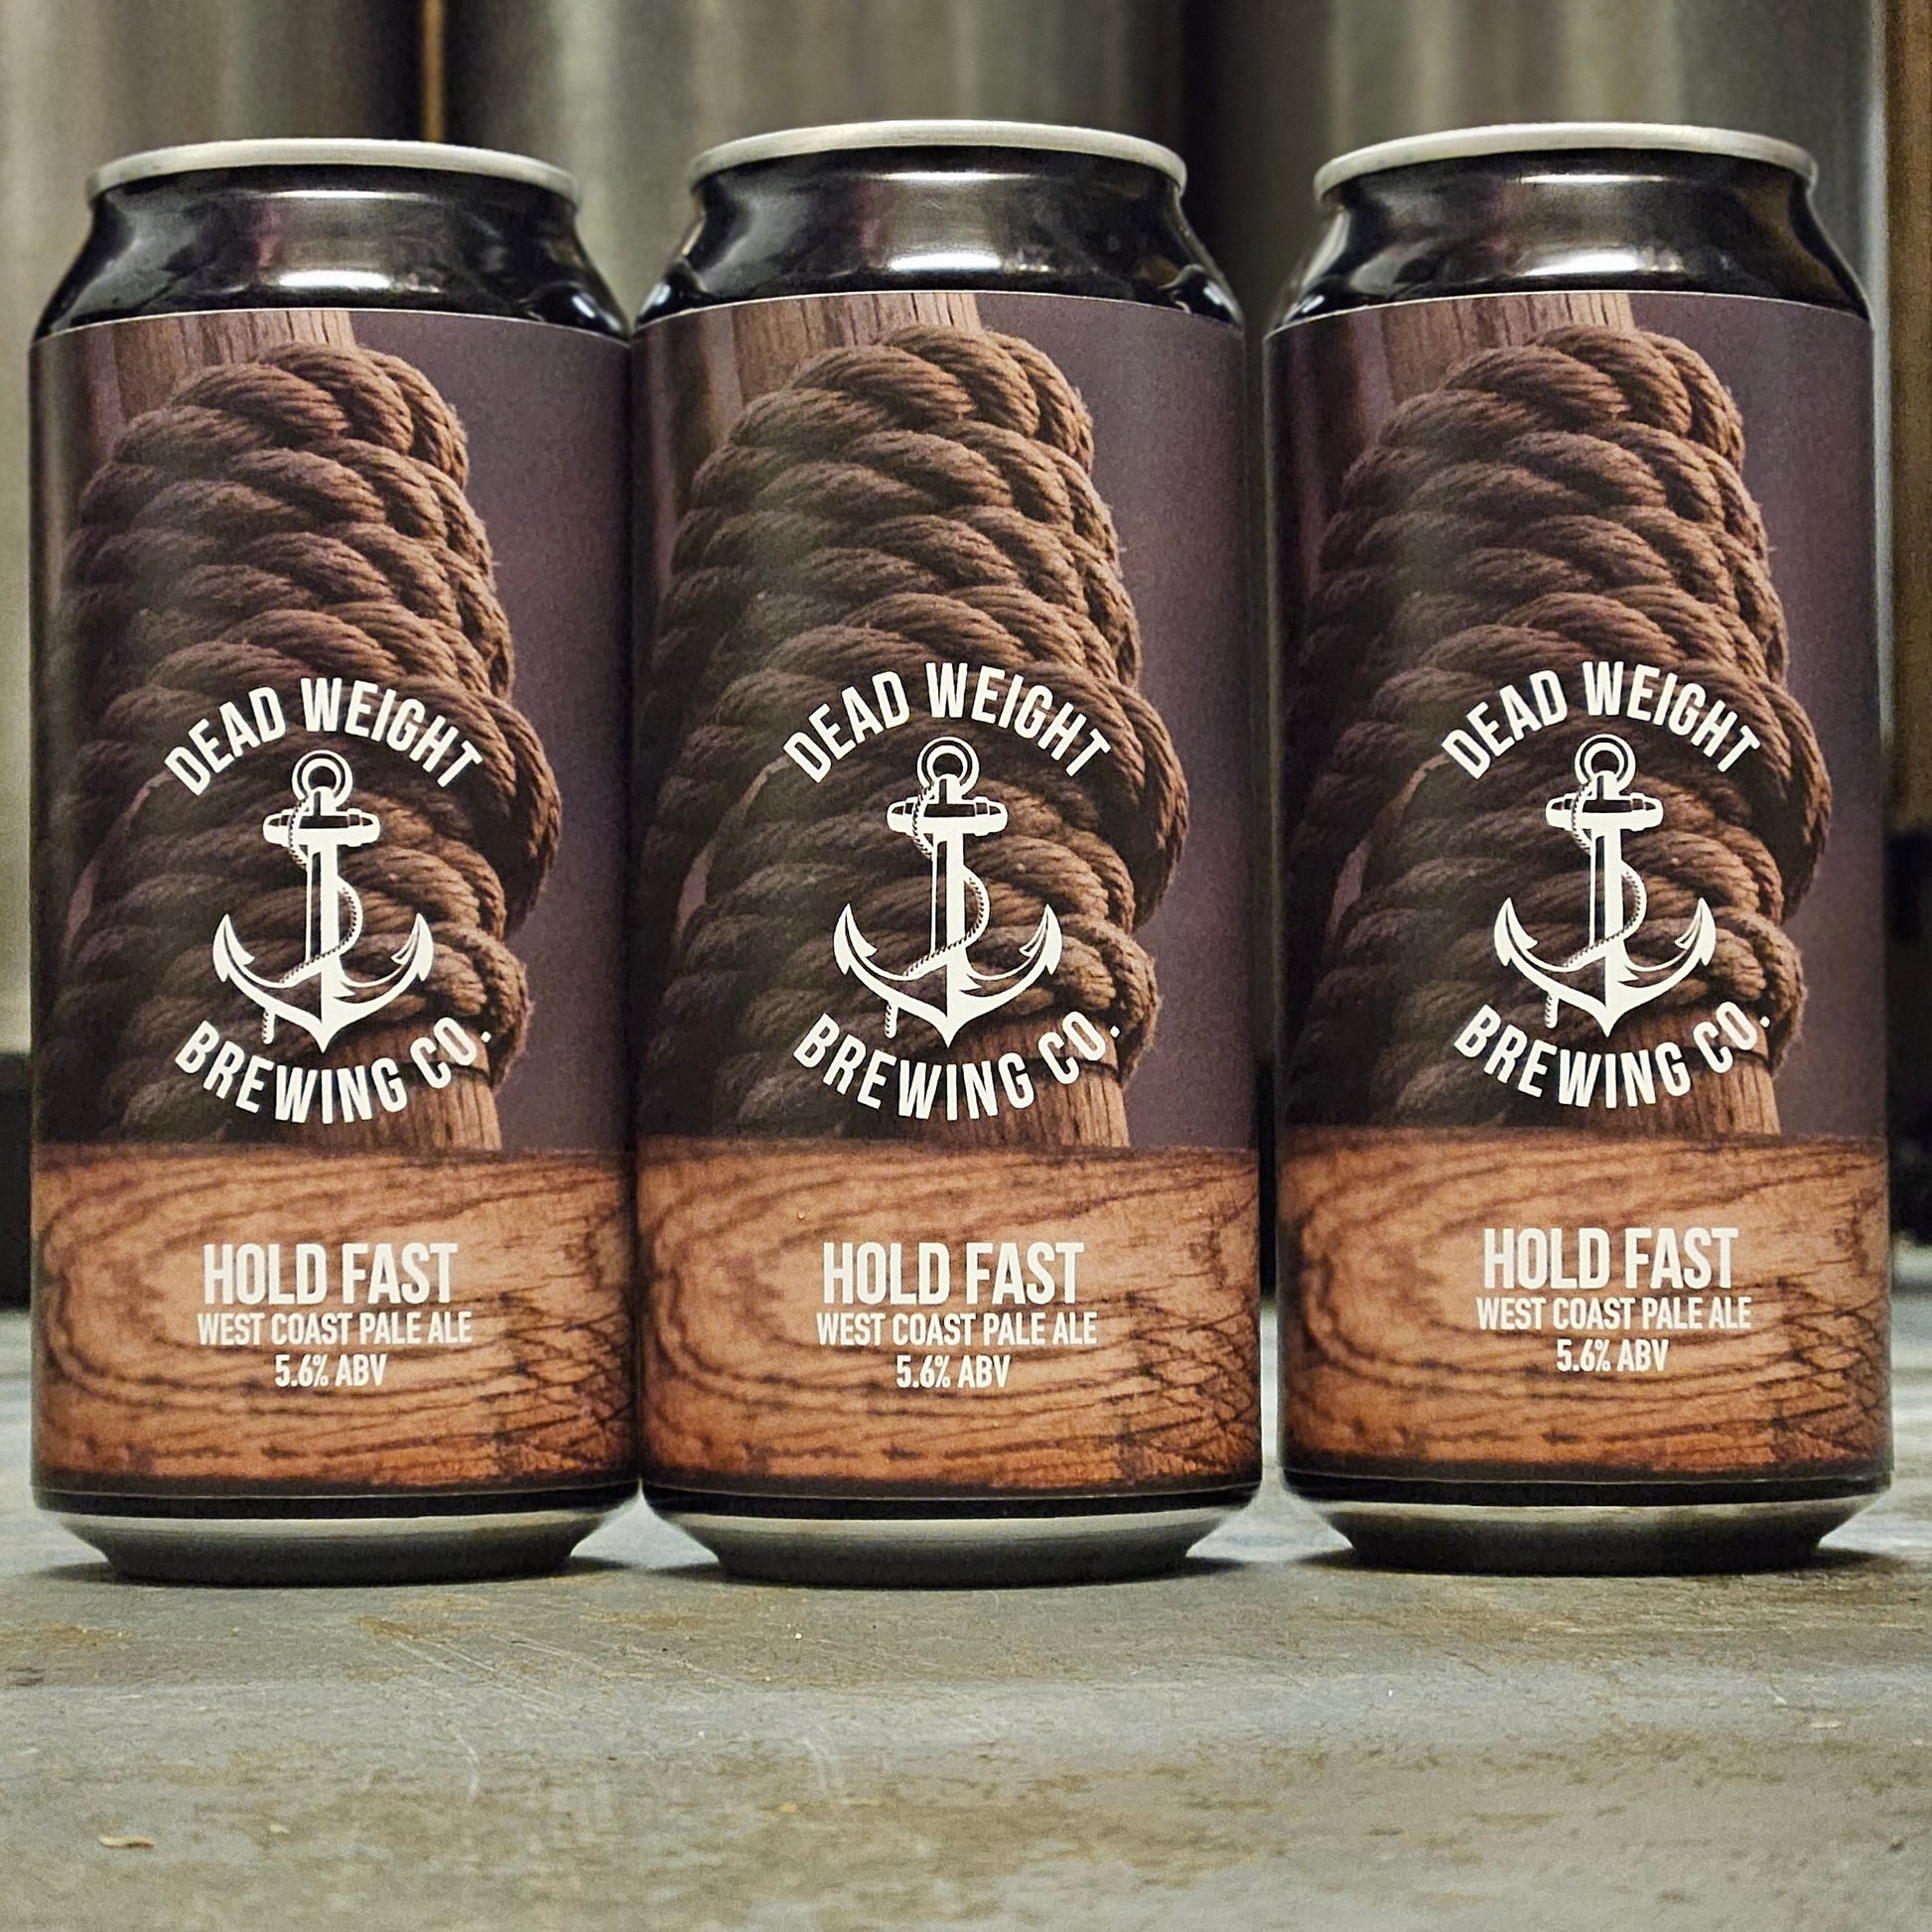 3 cans of Hold Fast West Coast Pale Ale